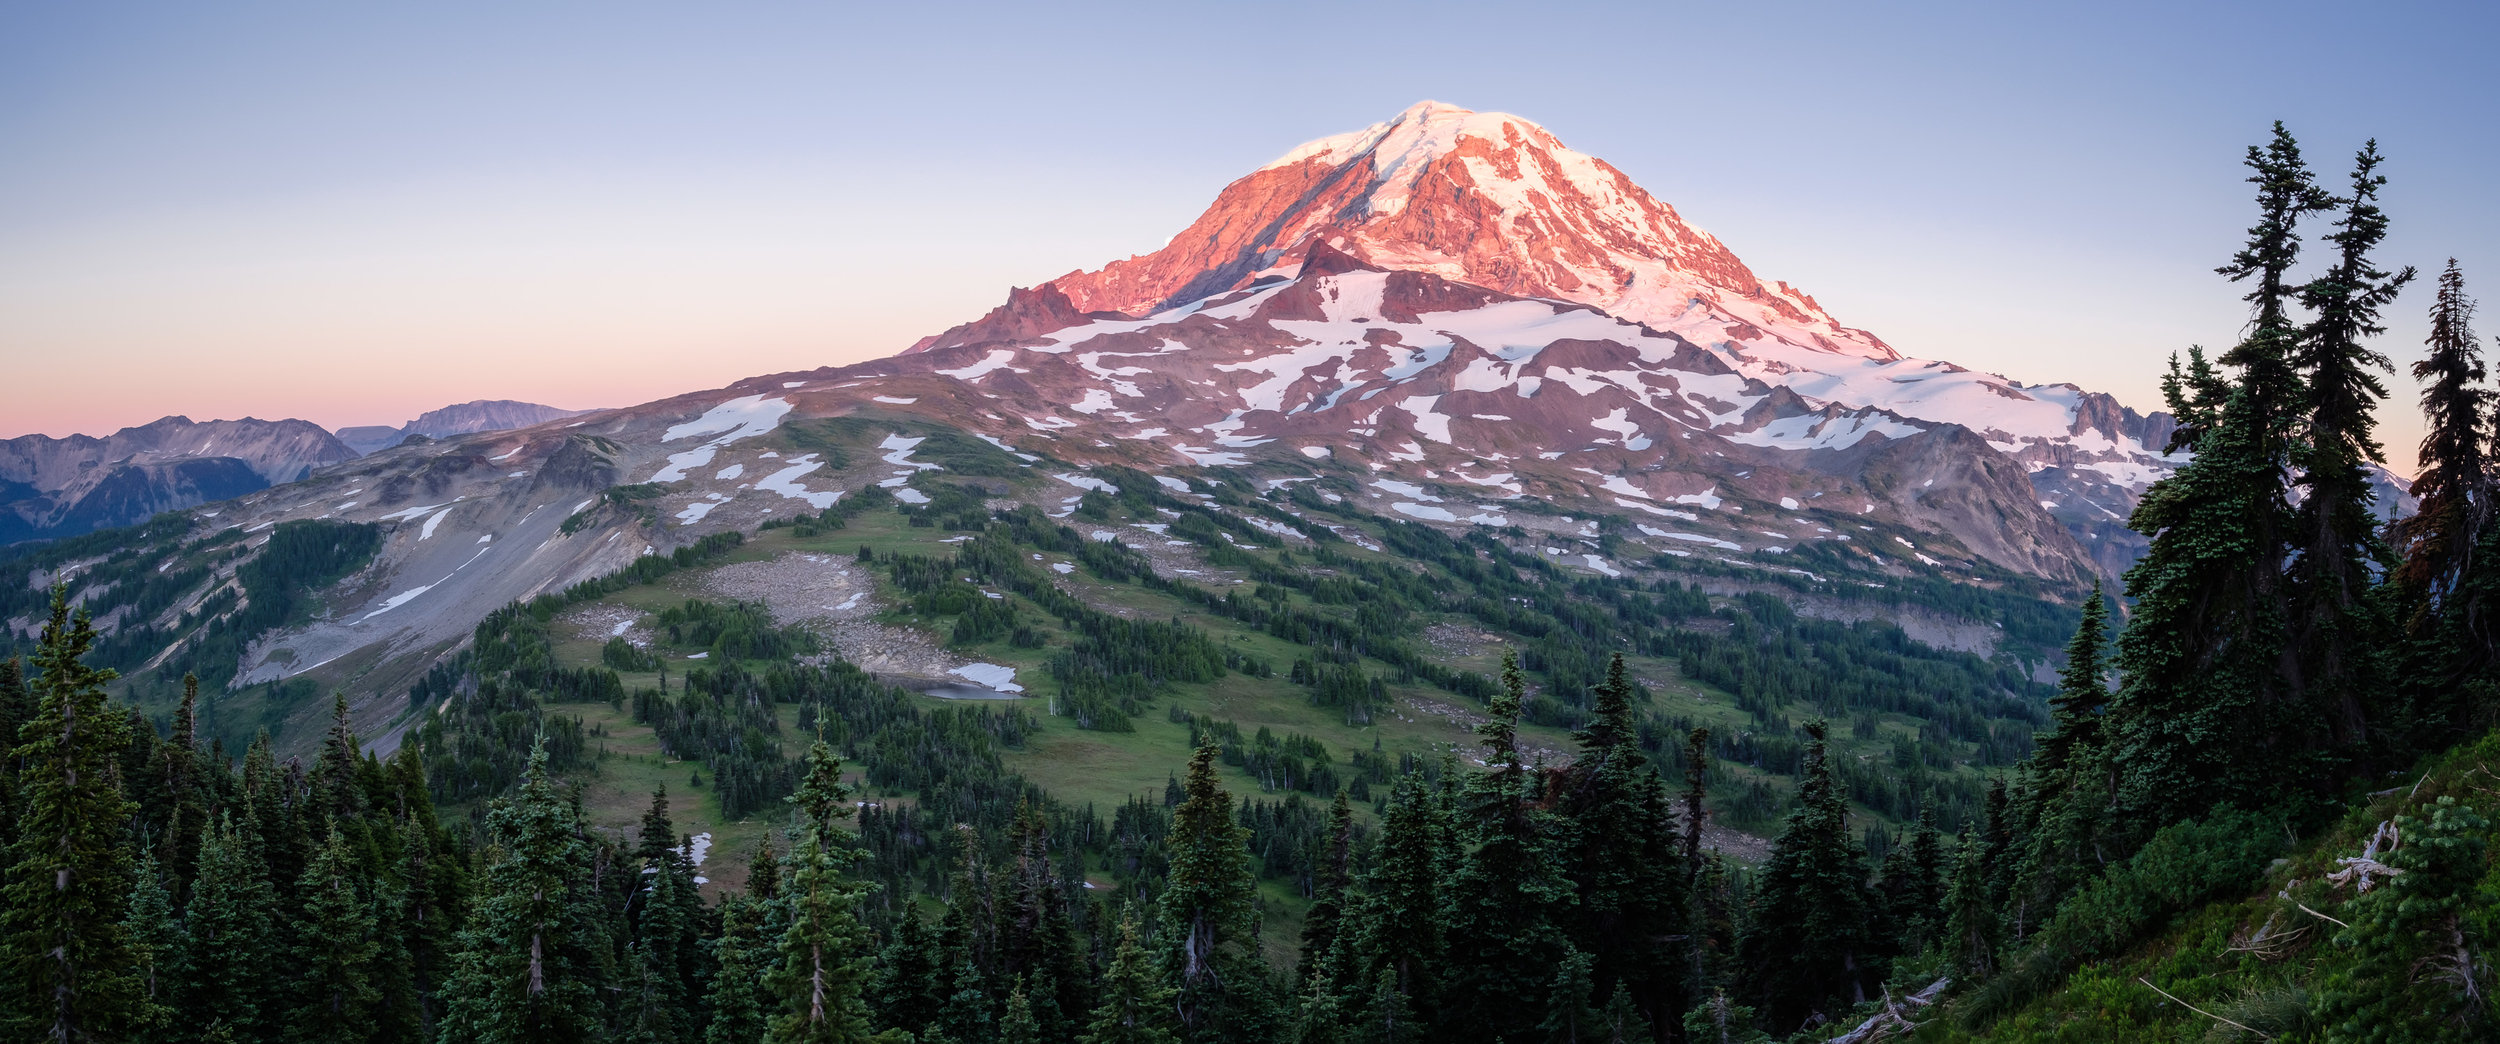  Rainier at sunset above Spray park, from the summit of Mount Pleasant 